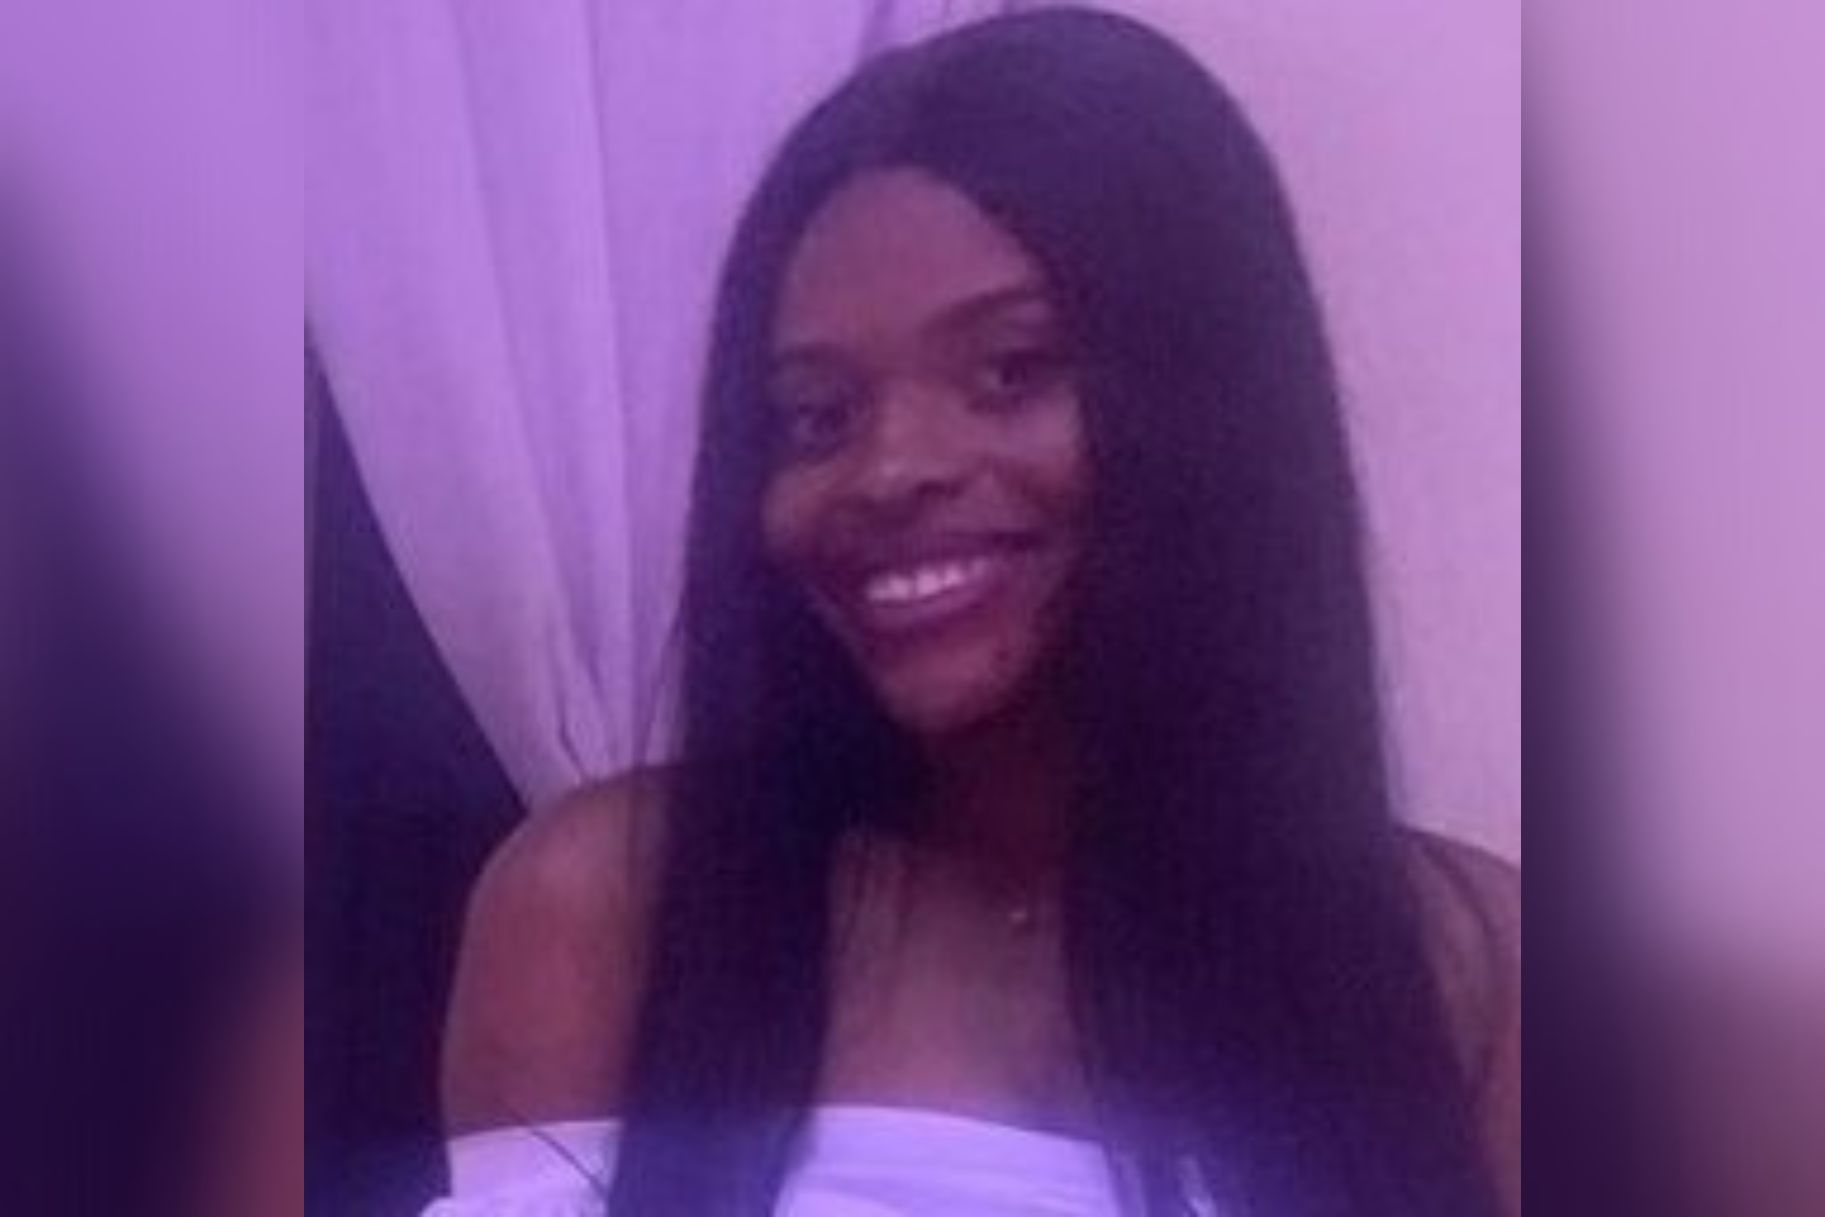 23-Year-Old College Student TiJae Baker Missing After Calling Her Mother and Begging to be Rescued During Trip to Washington D.C.